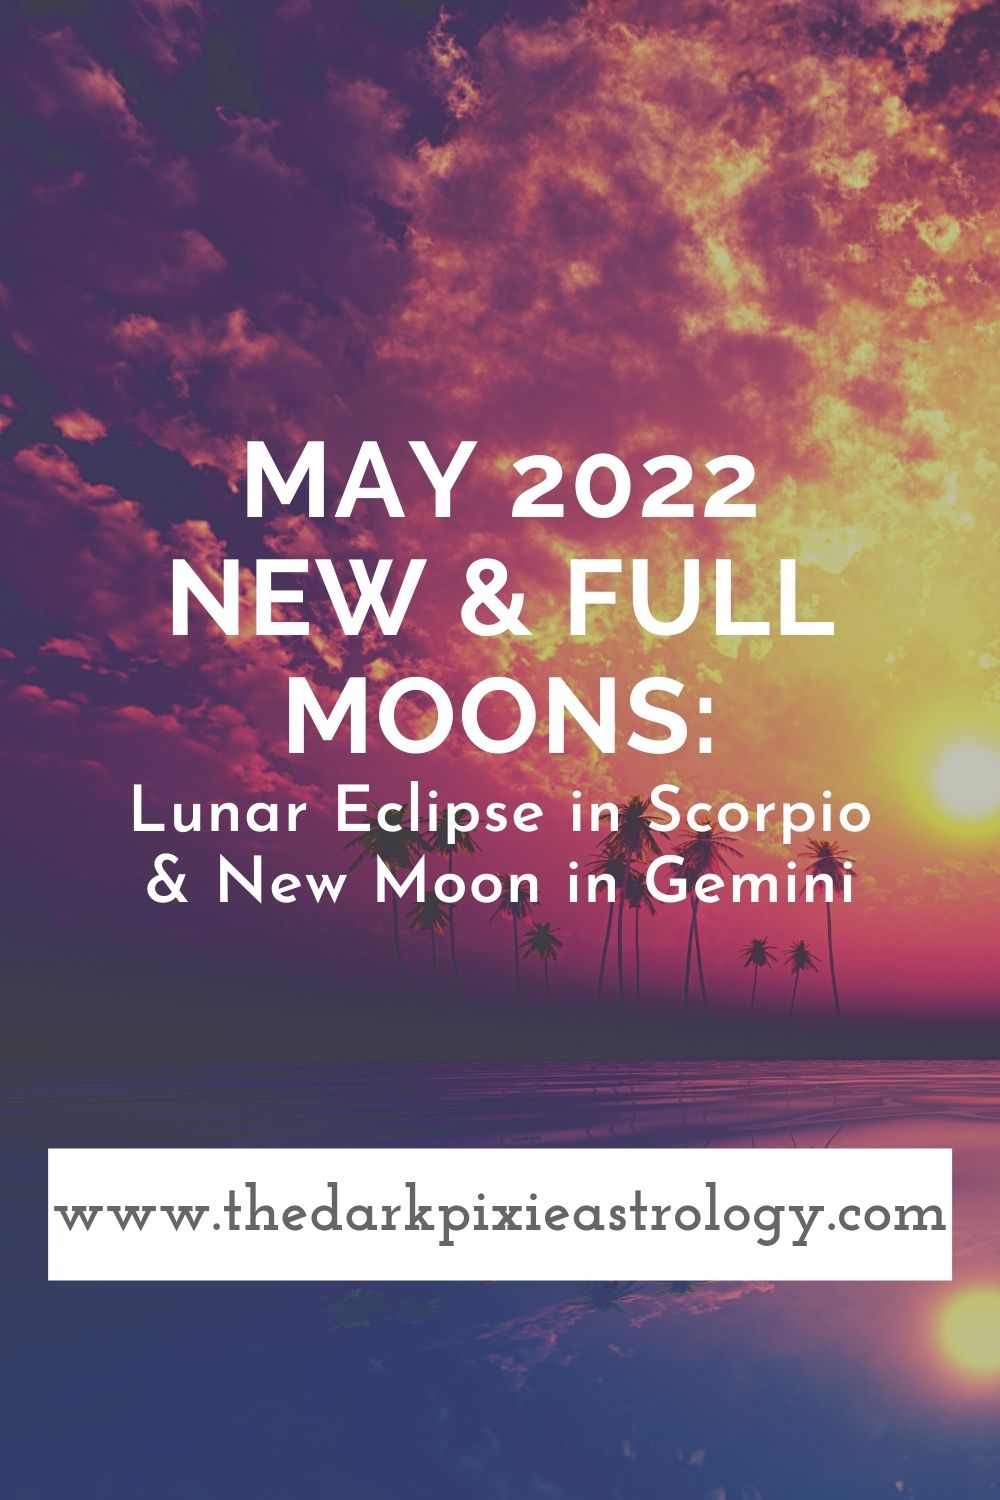 May 2022 New & Full Moons: Lunar Eclipse in Scorpio & New Moon in Gemini - The Dark Pixie Astrology